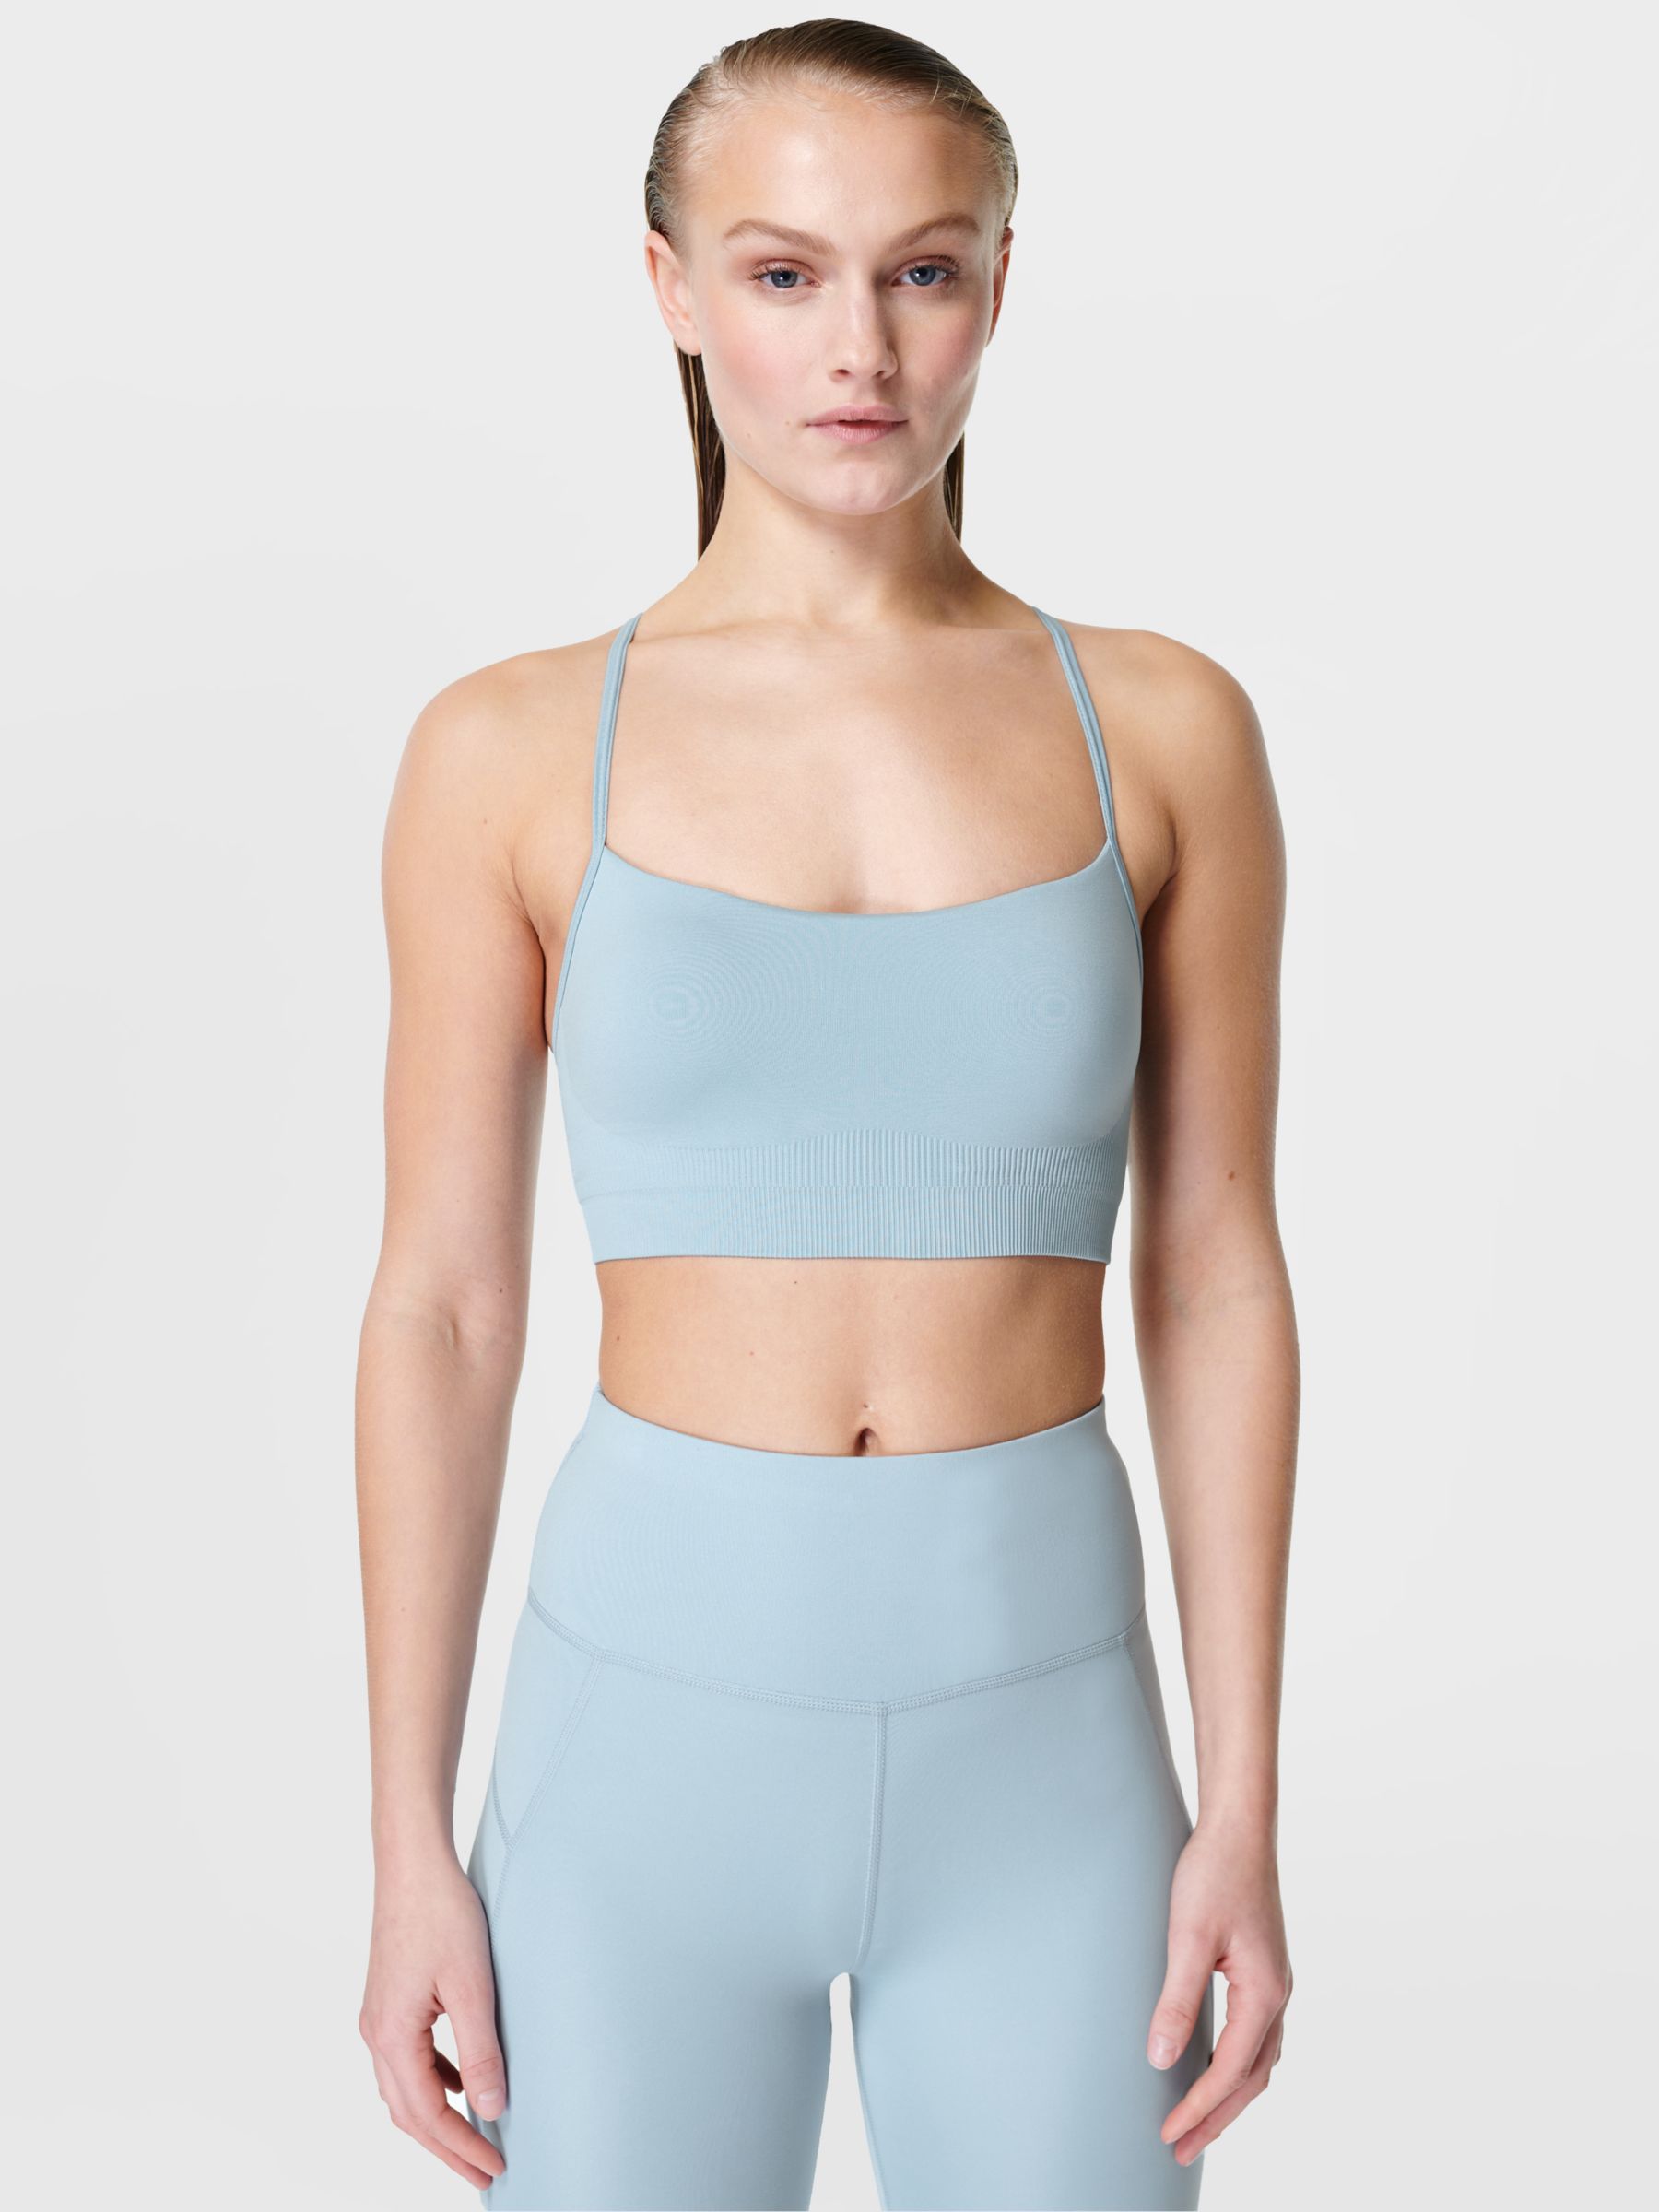 Lululemon Sports Bra, size 6  Classifieds for Jobs, Rentals, Cars